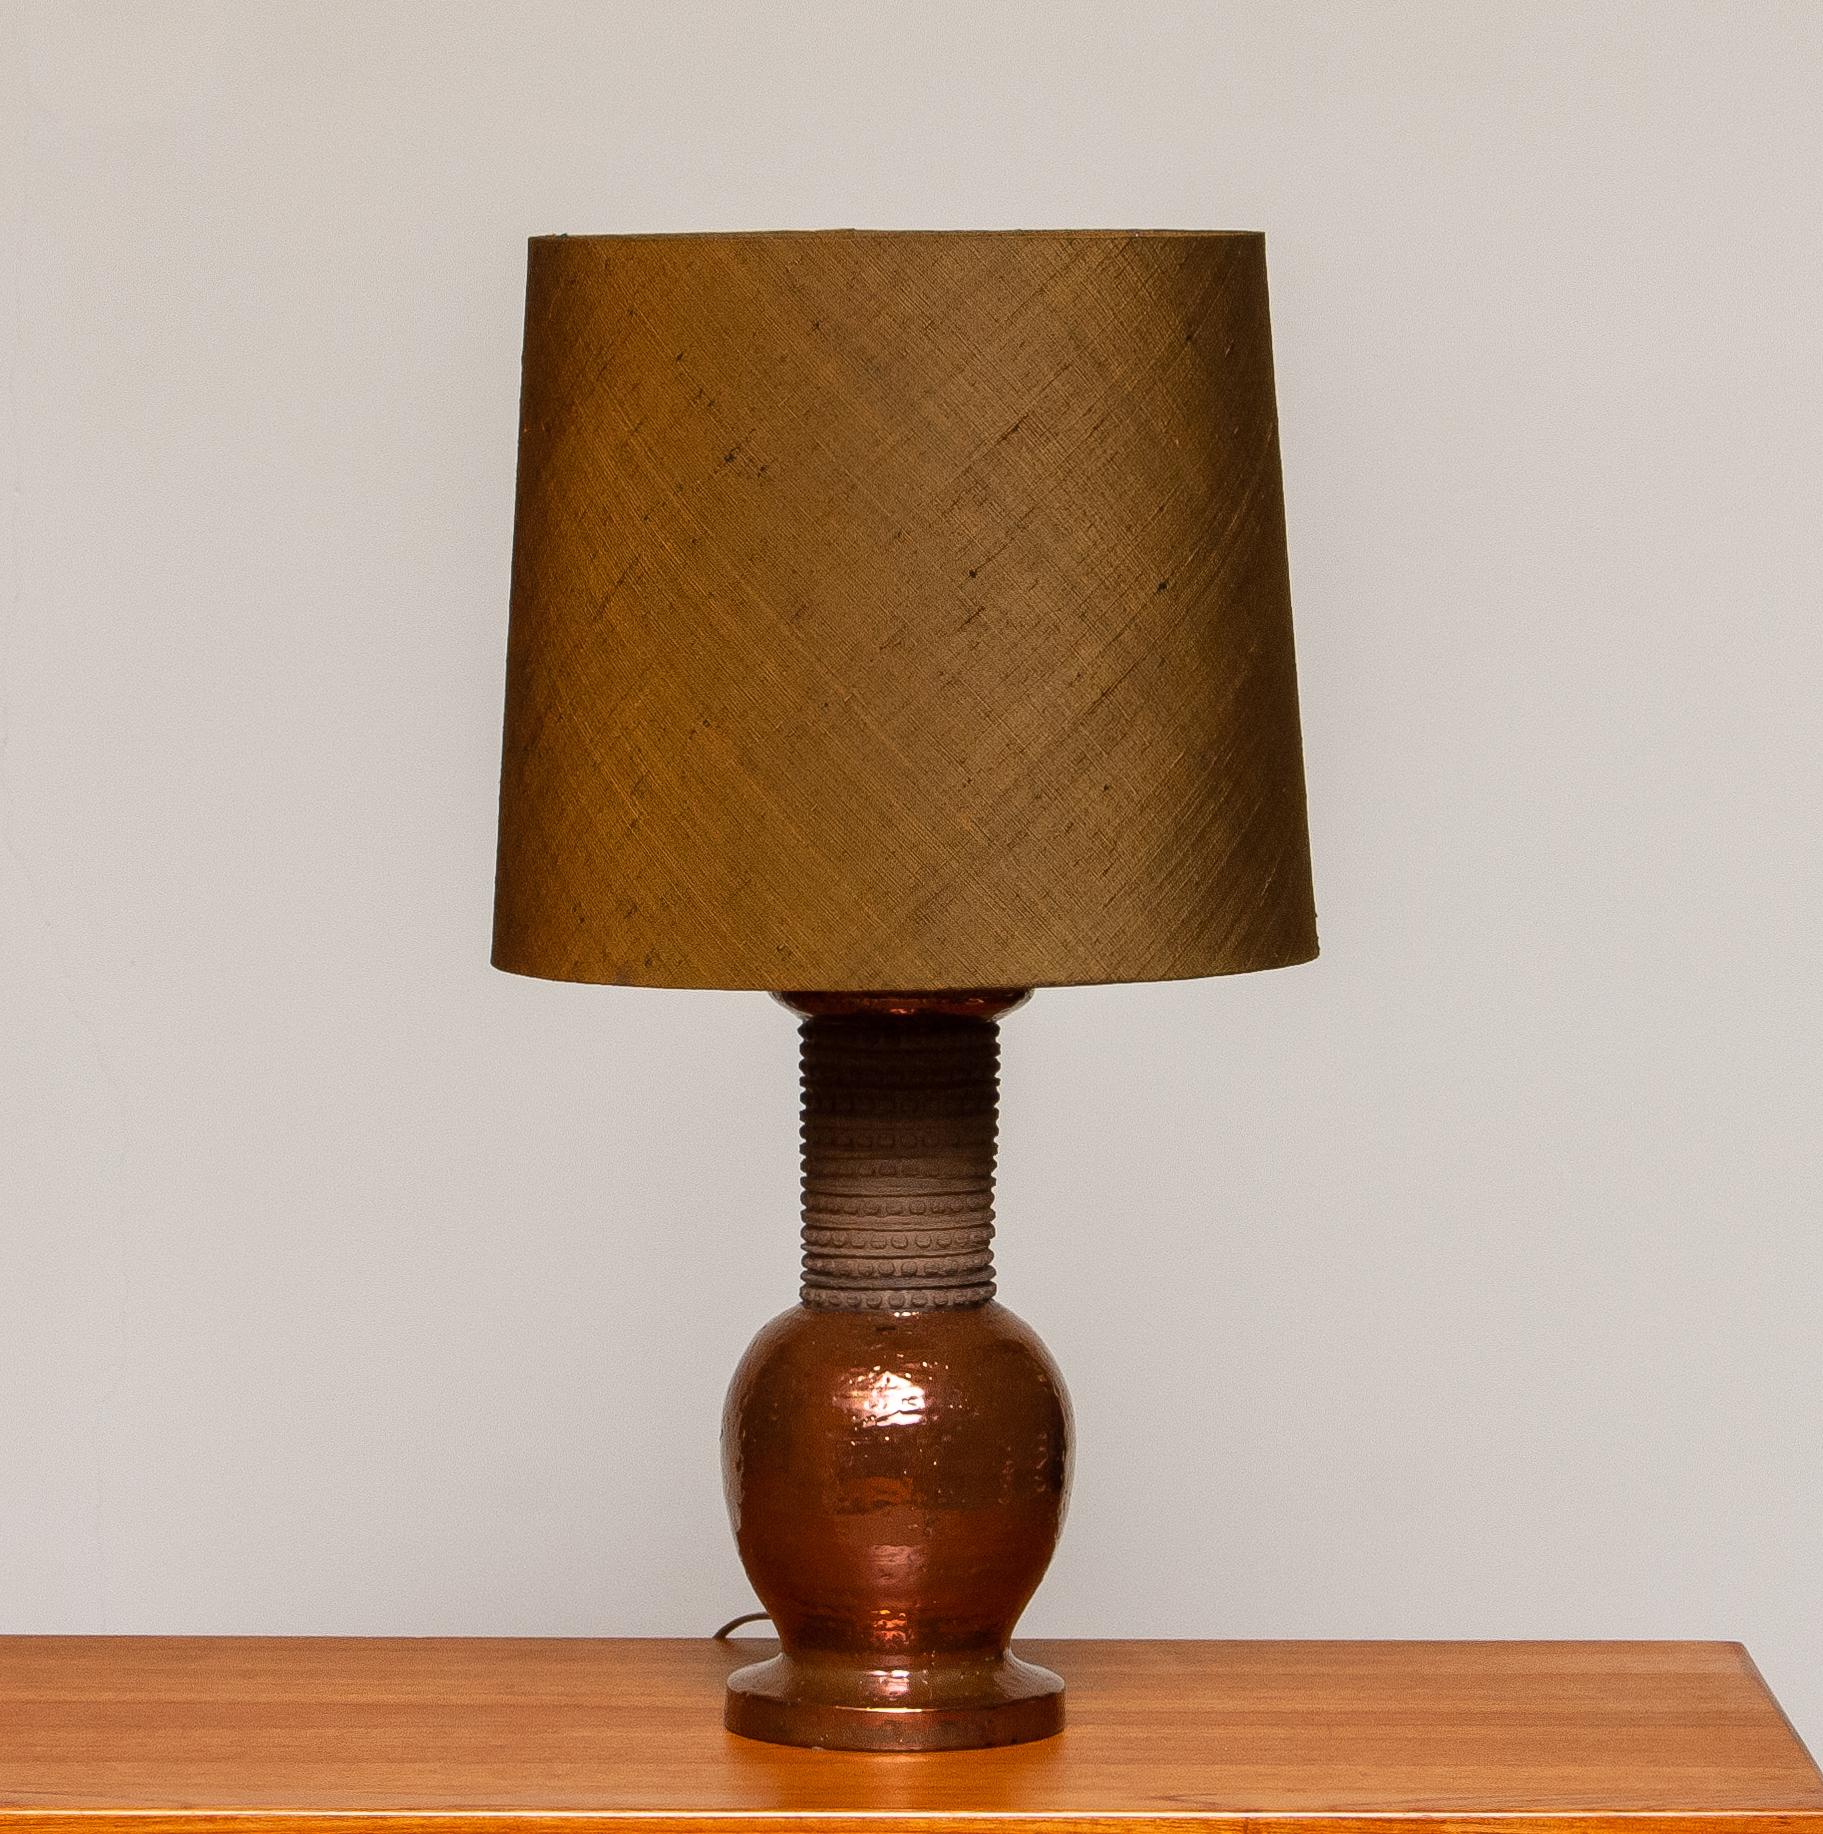 Beautiful with copper covered, ceramic table lamp made by Bitossi Italy in the 1960s for Bergboms, Sweden.
The lamp is in excellent condition and technically 100%. The fitting are for a screw bulb size E27 E28 and suit 110 and 230 volts.
The shade